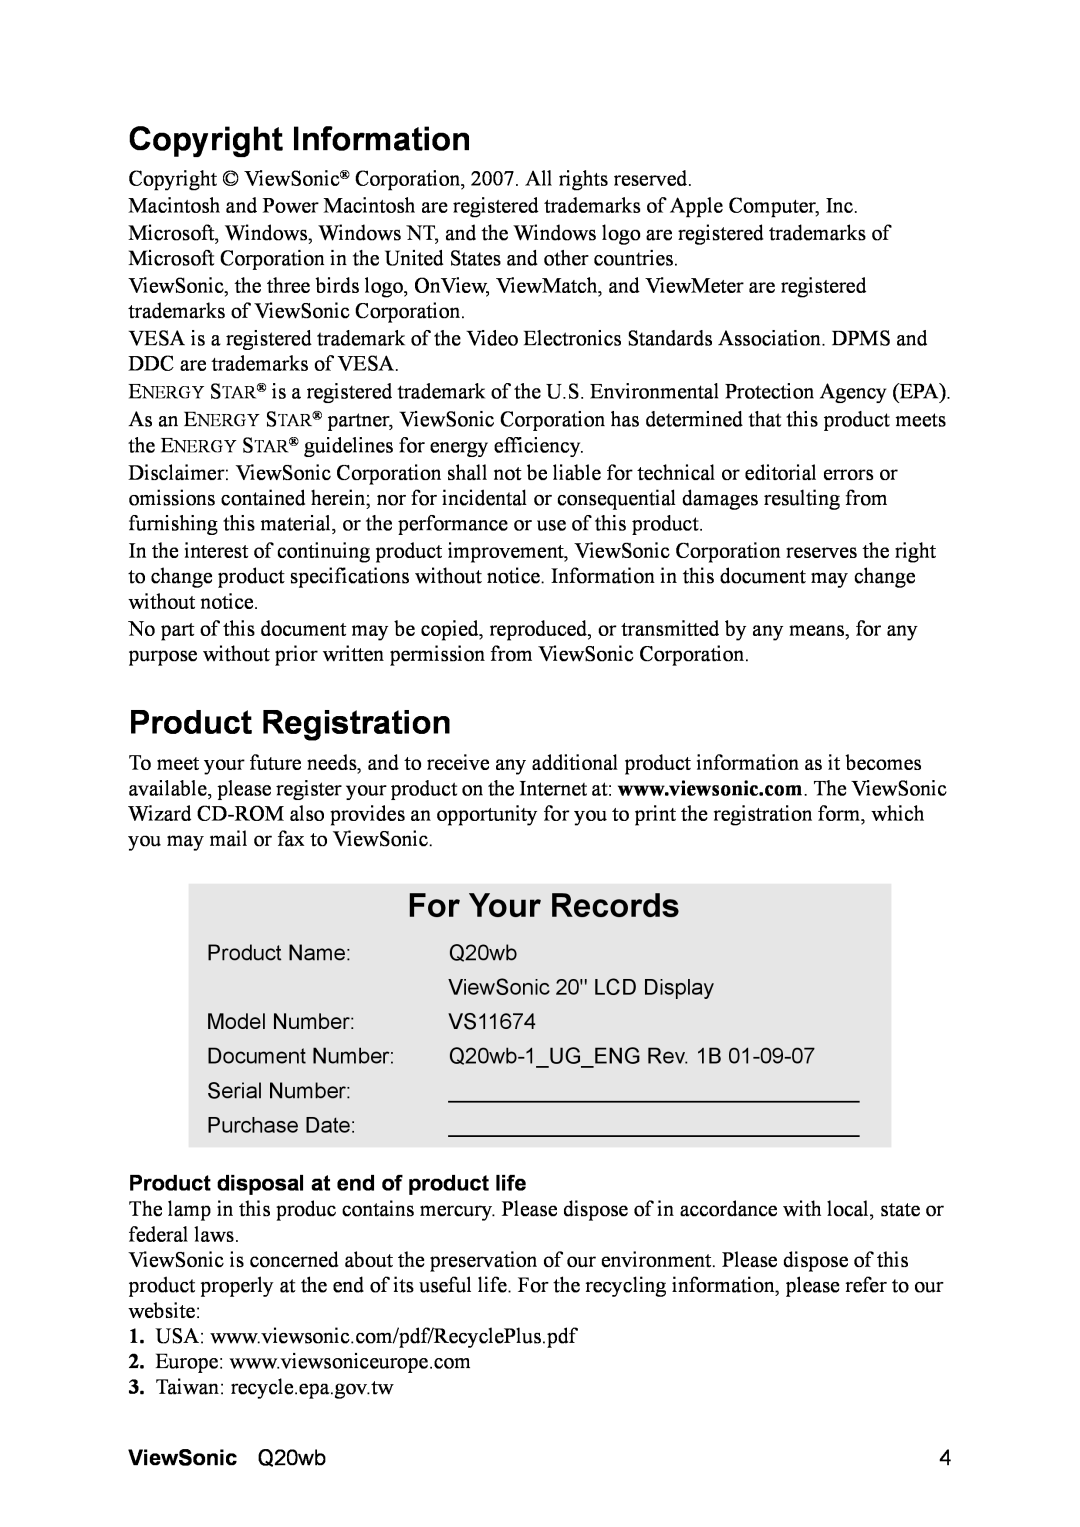 ViewSonic Q20WB Copyright Information, Product Registration, For Your Records, Product disposal at end of product life 